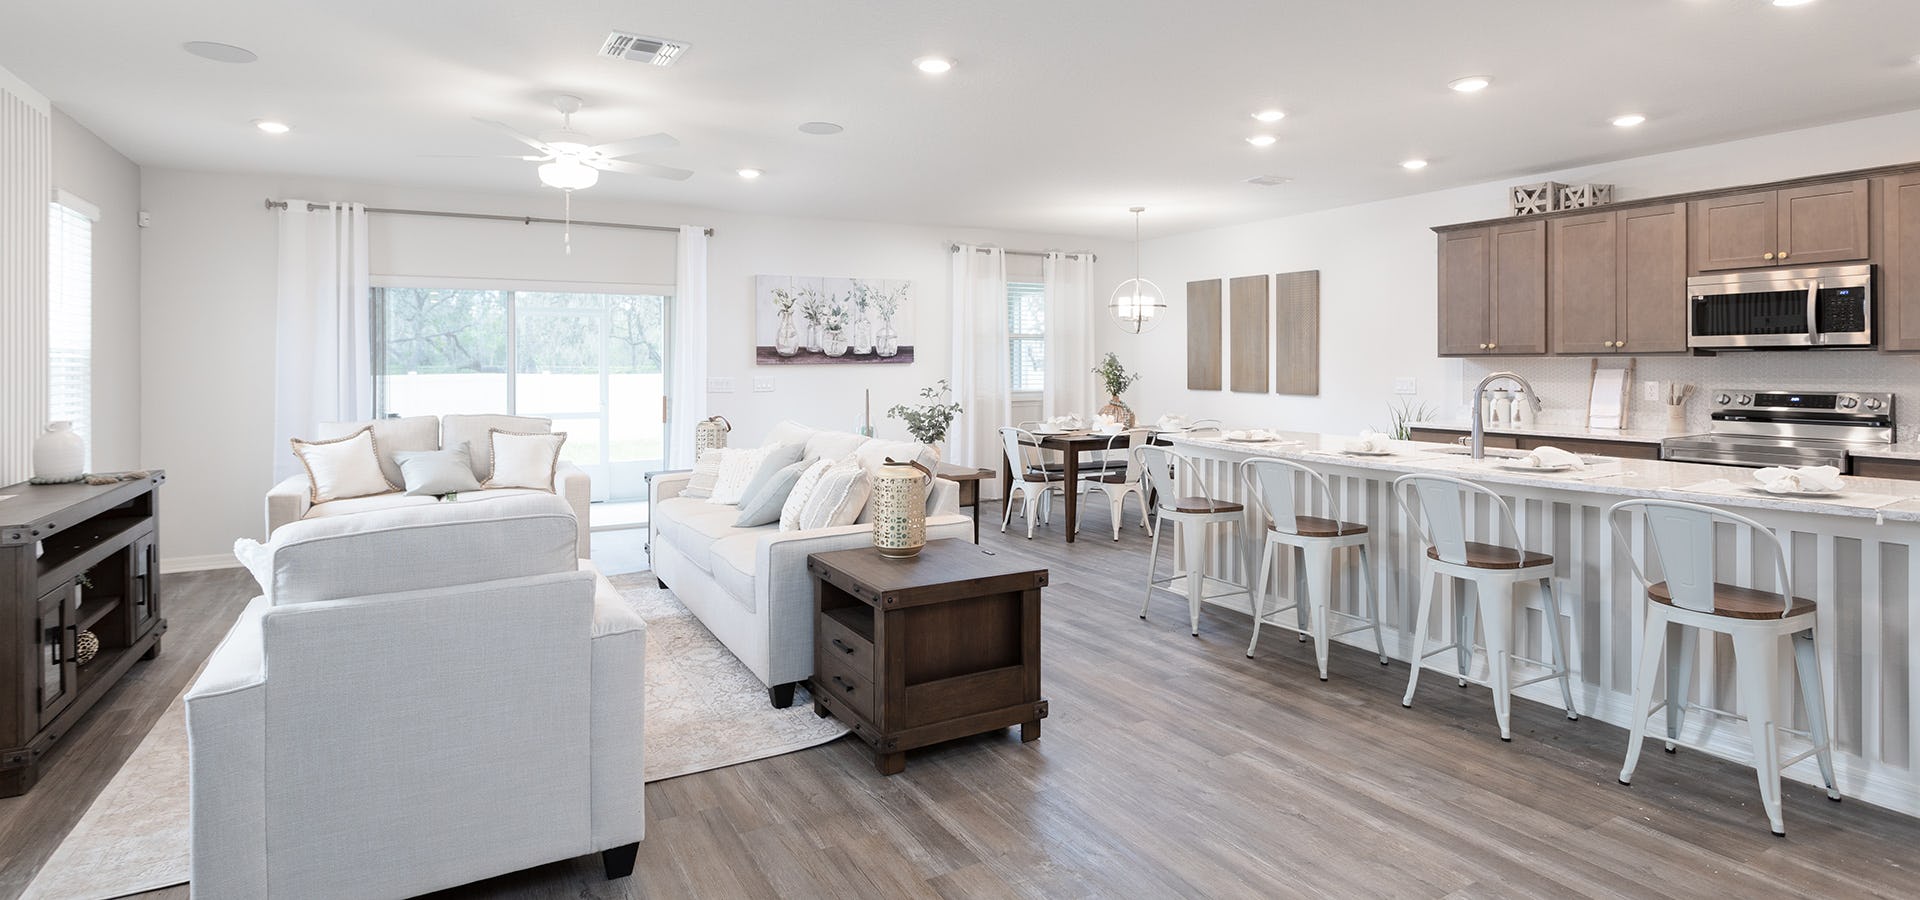 Living area in new model home at Ridgewood South in Riverview, FL